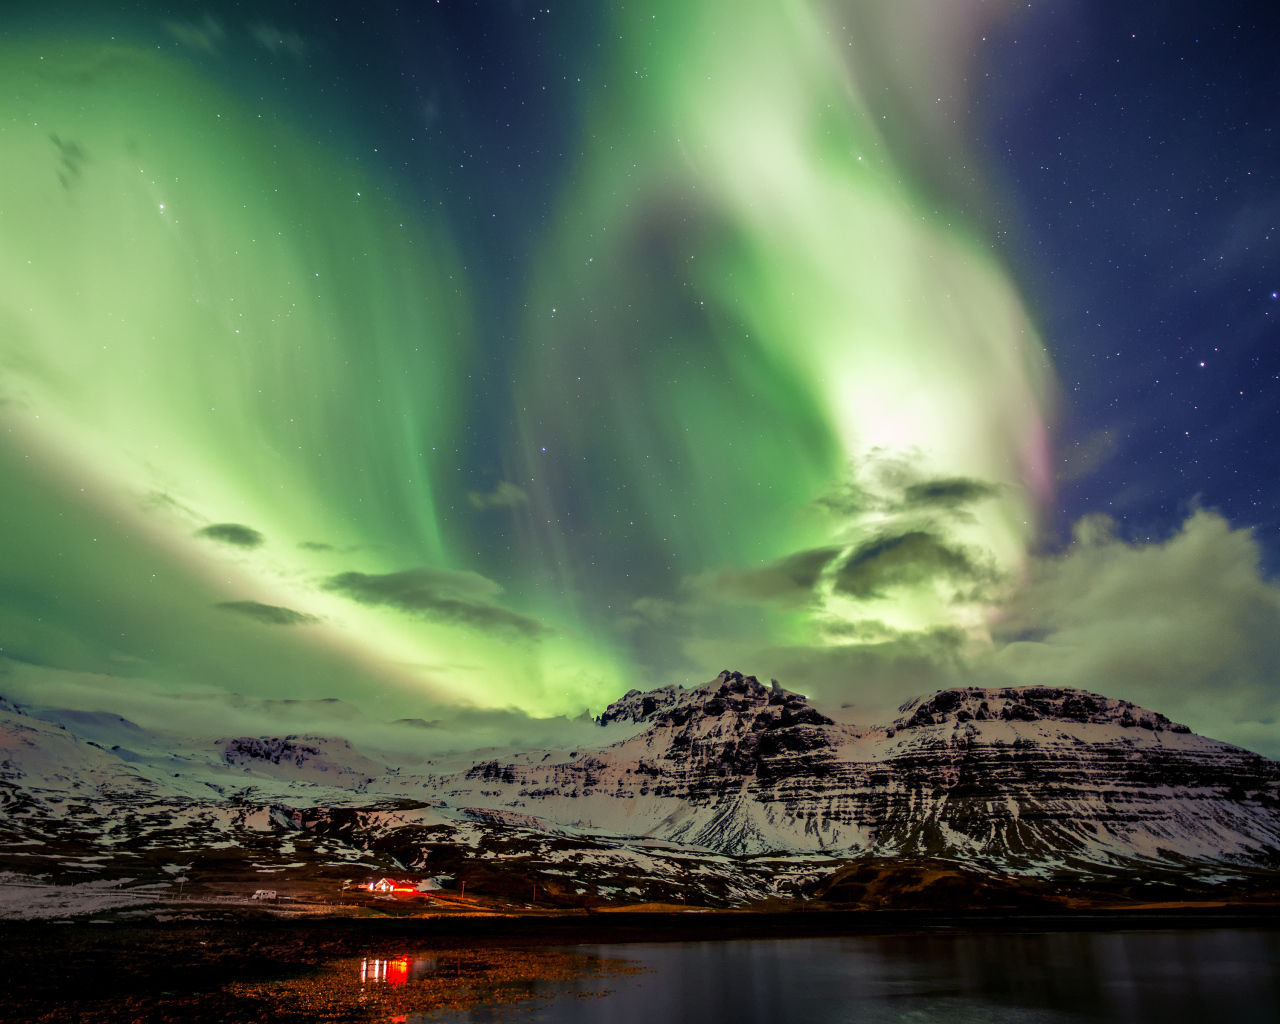 Northern lights over snowy mountains, Iceland